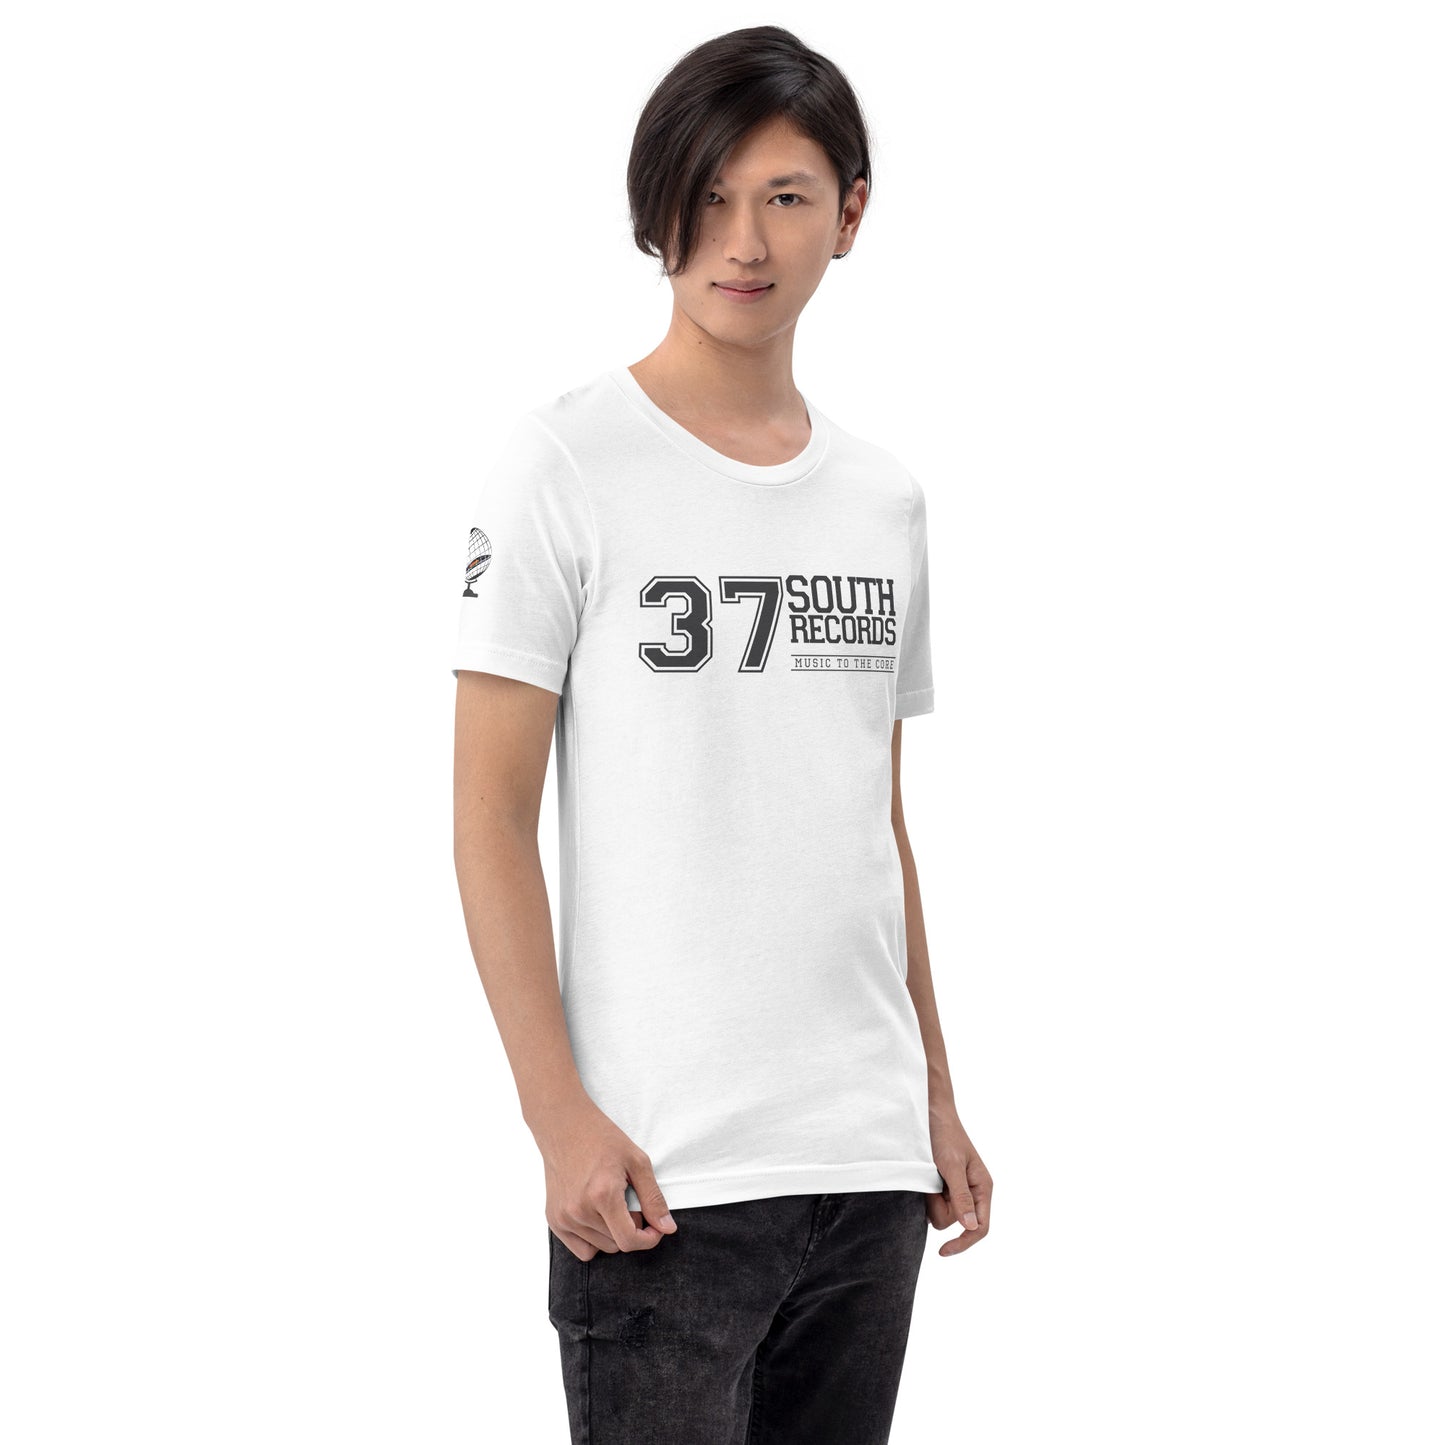 37 South Records Unisex Tee